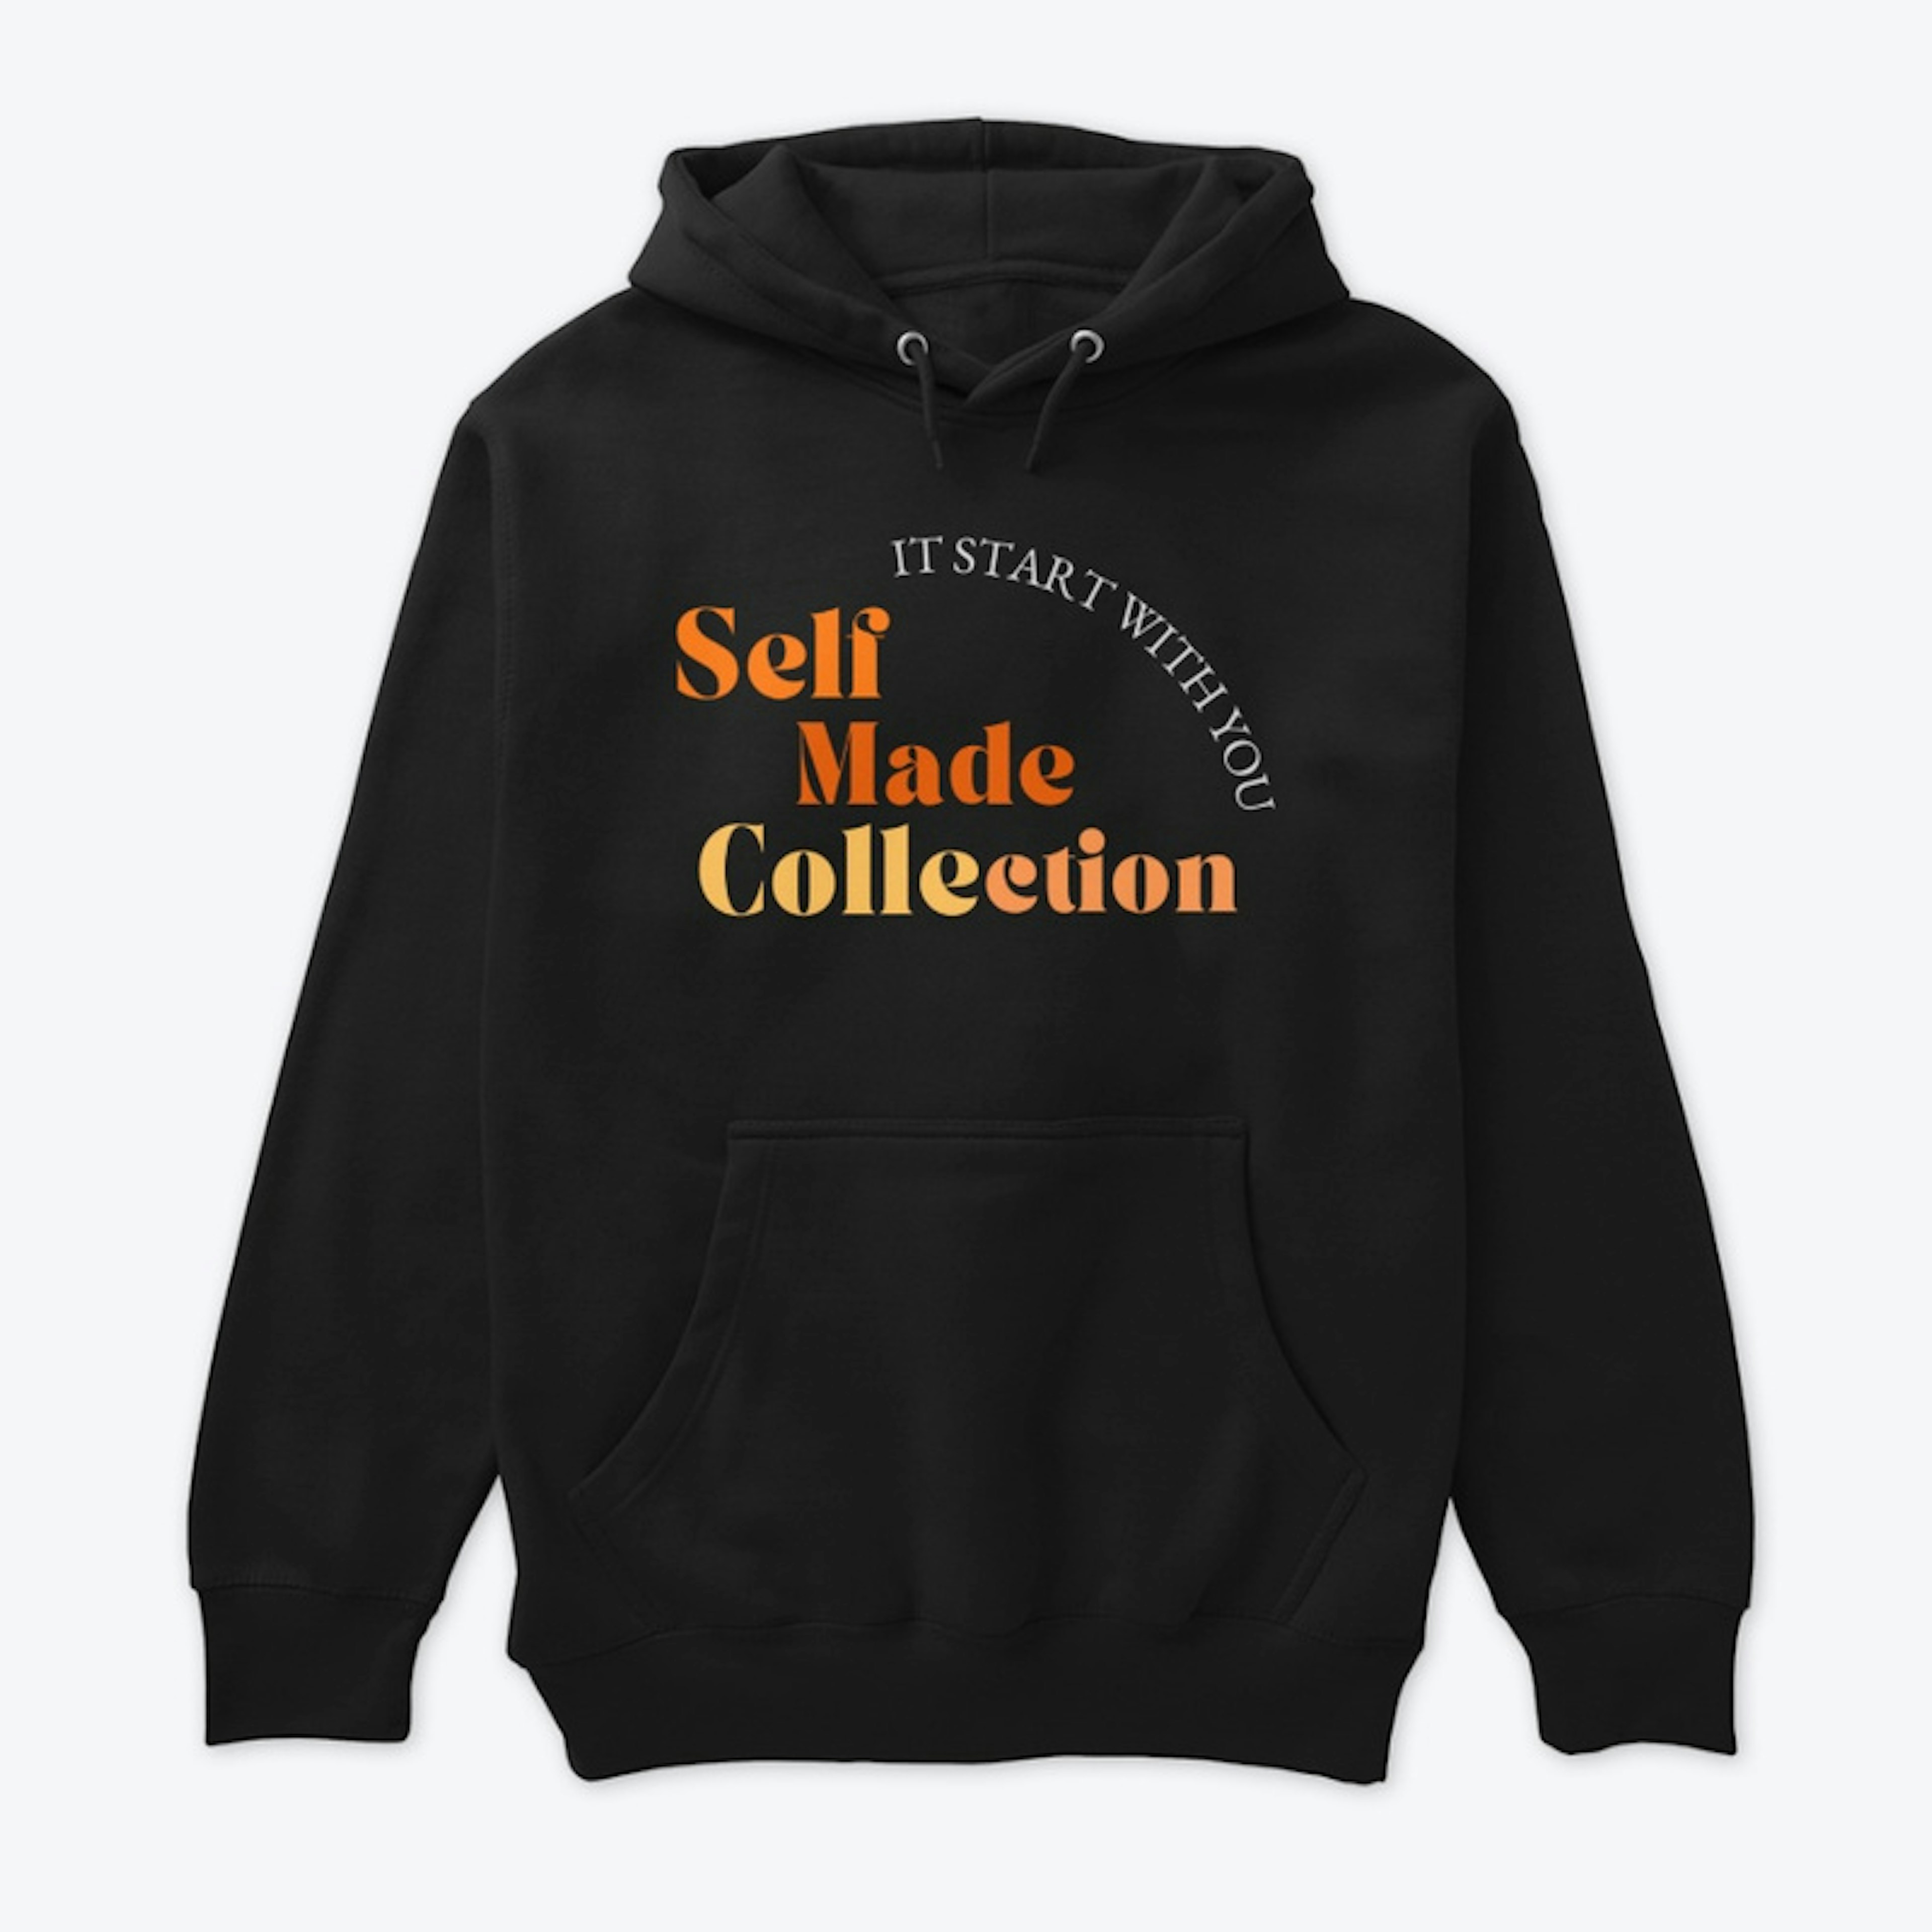 Self Made Collection